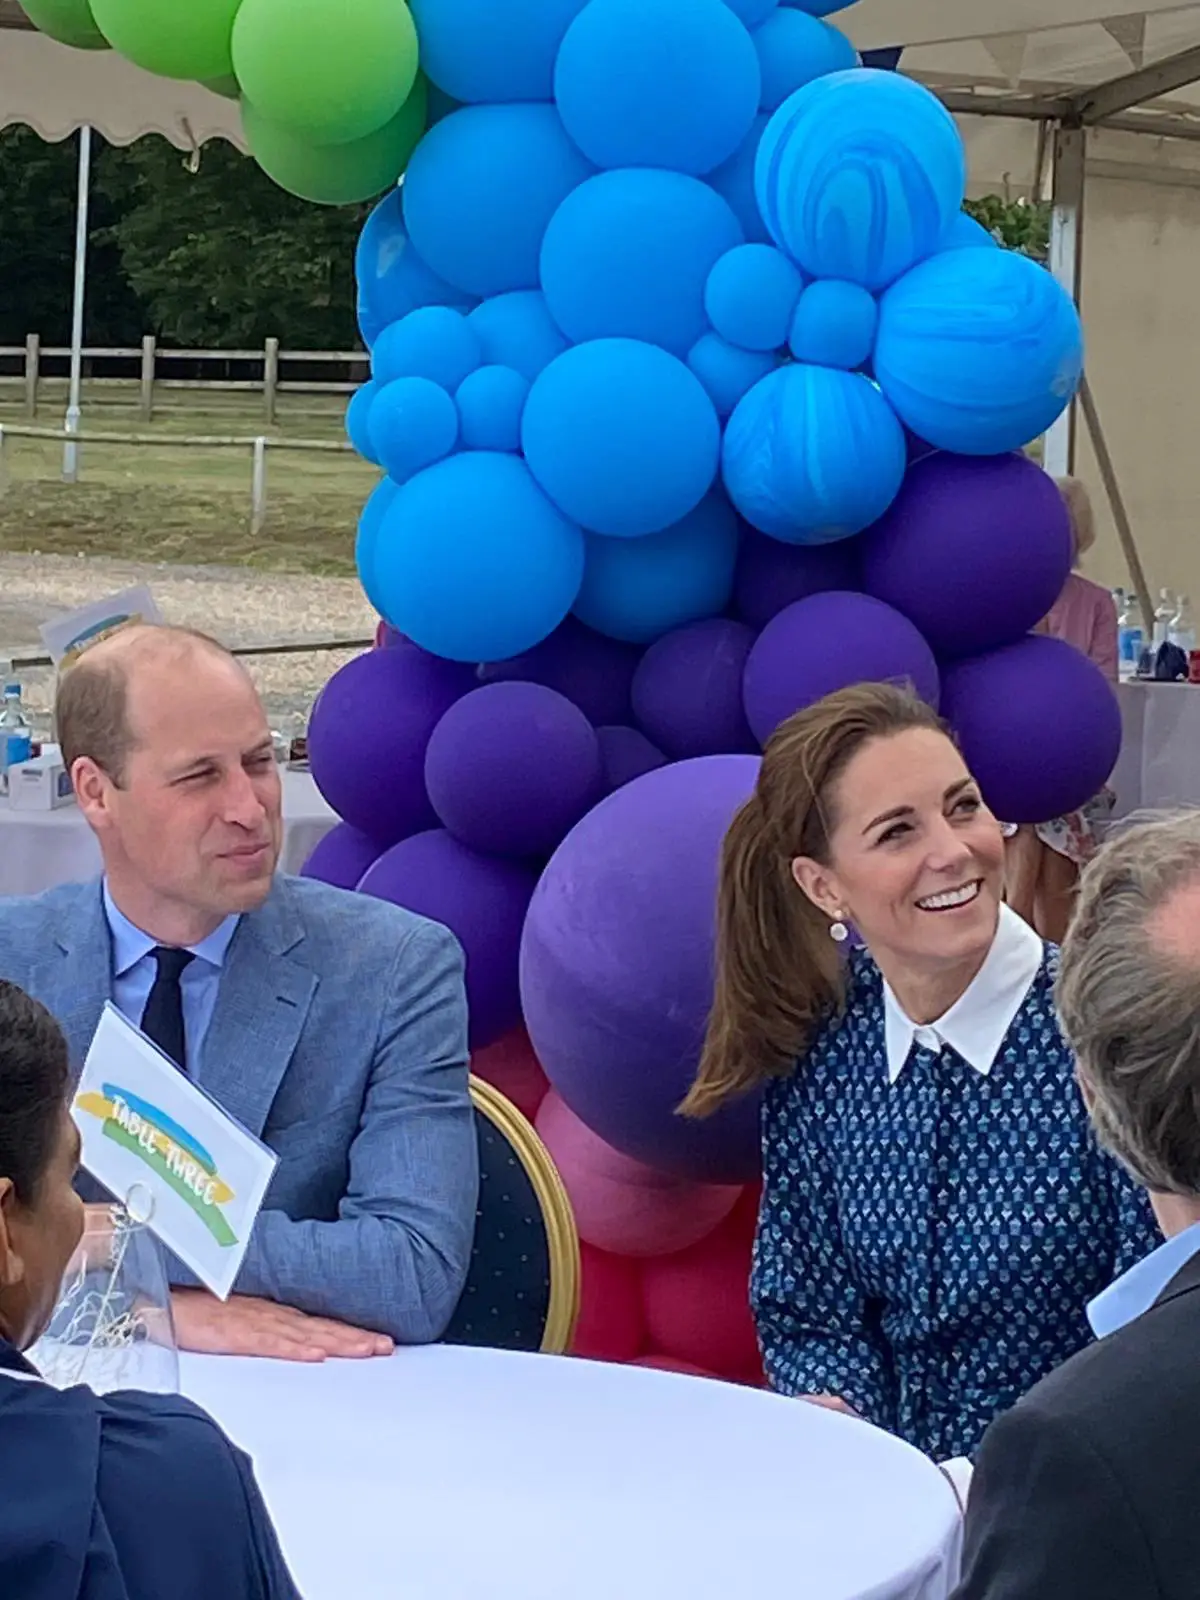 The Duke and Duchess of Cambridge attended afternoon tea party to celebrate NHS 72nd birthday